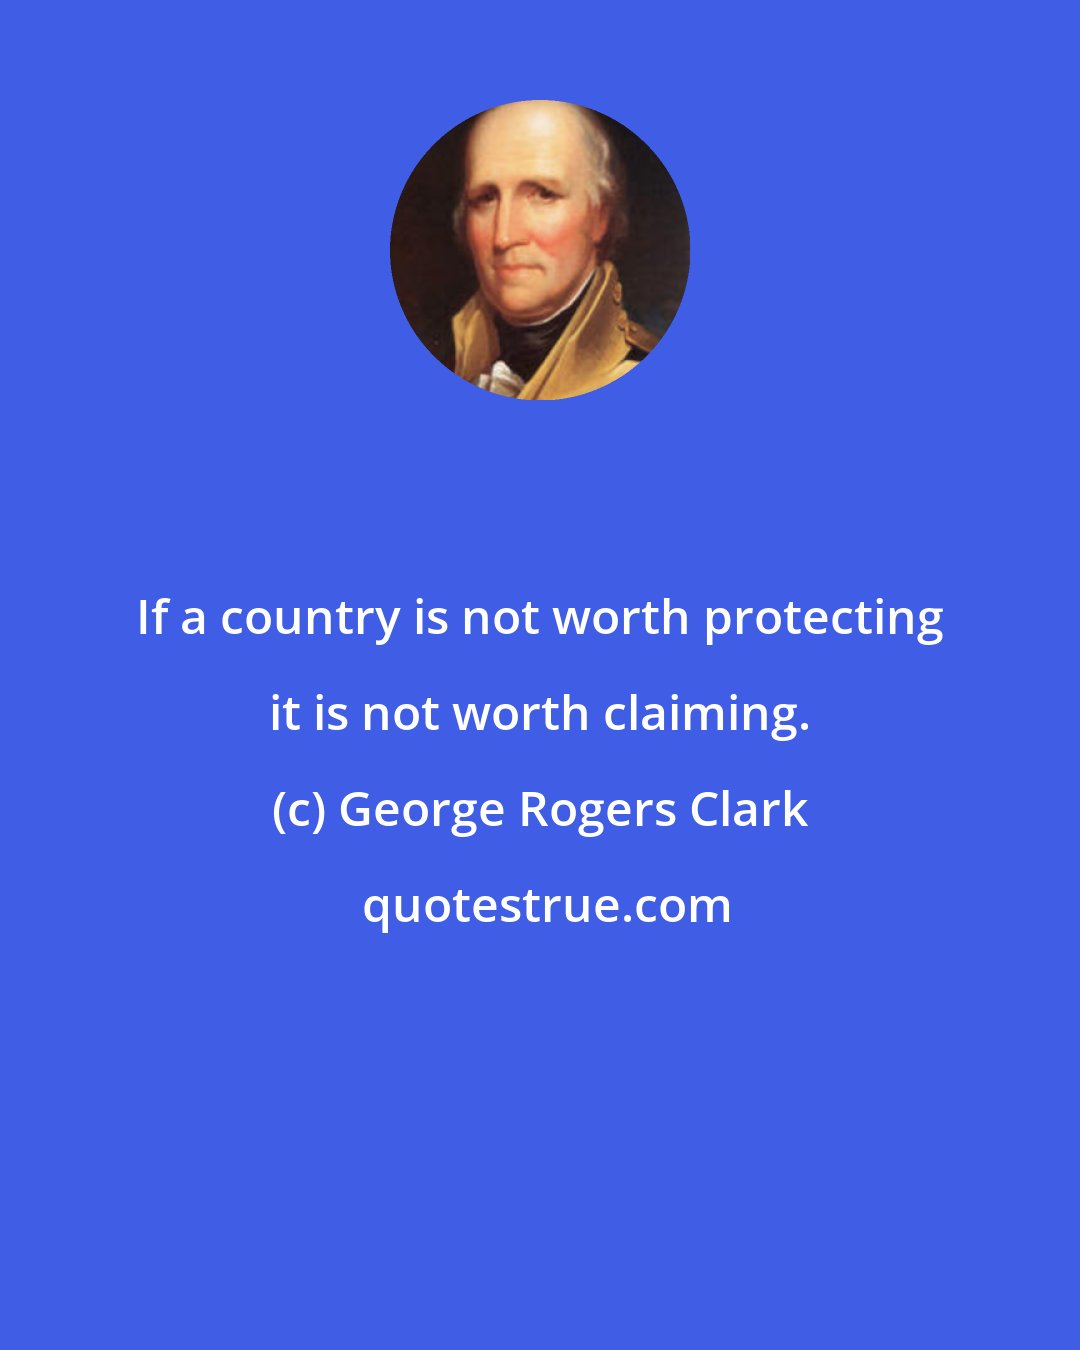 George Rogers Clark: If a country is not worth protecting it is not worth claiming.